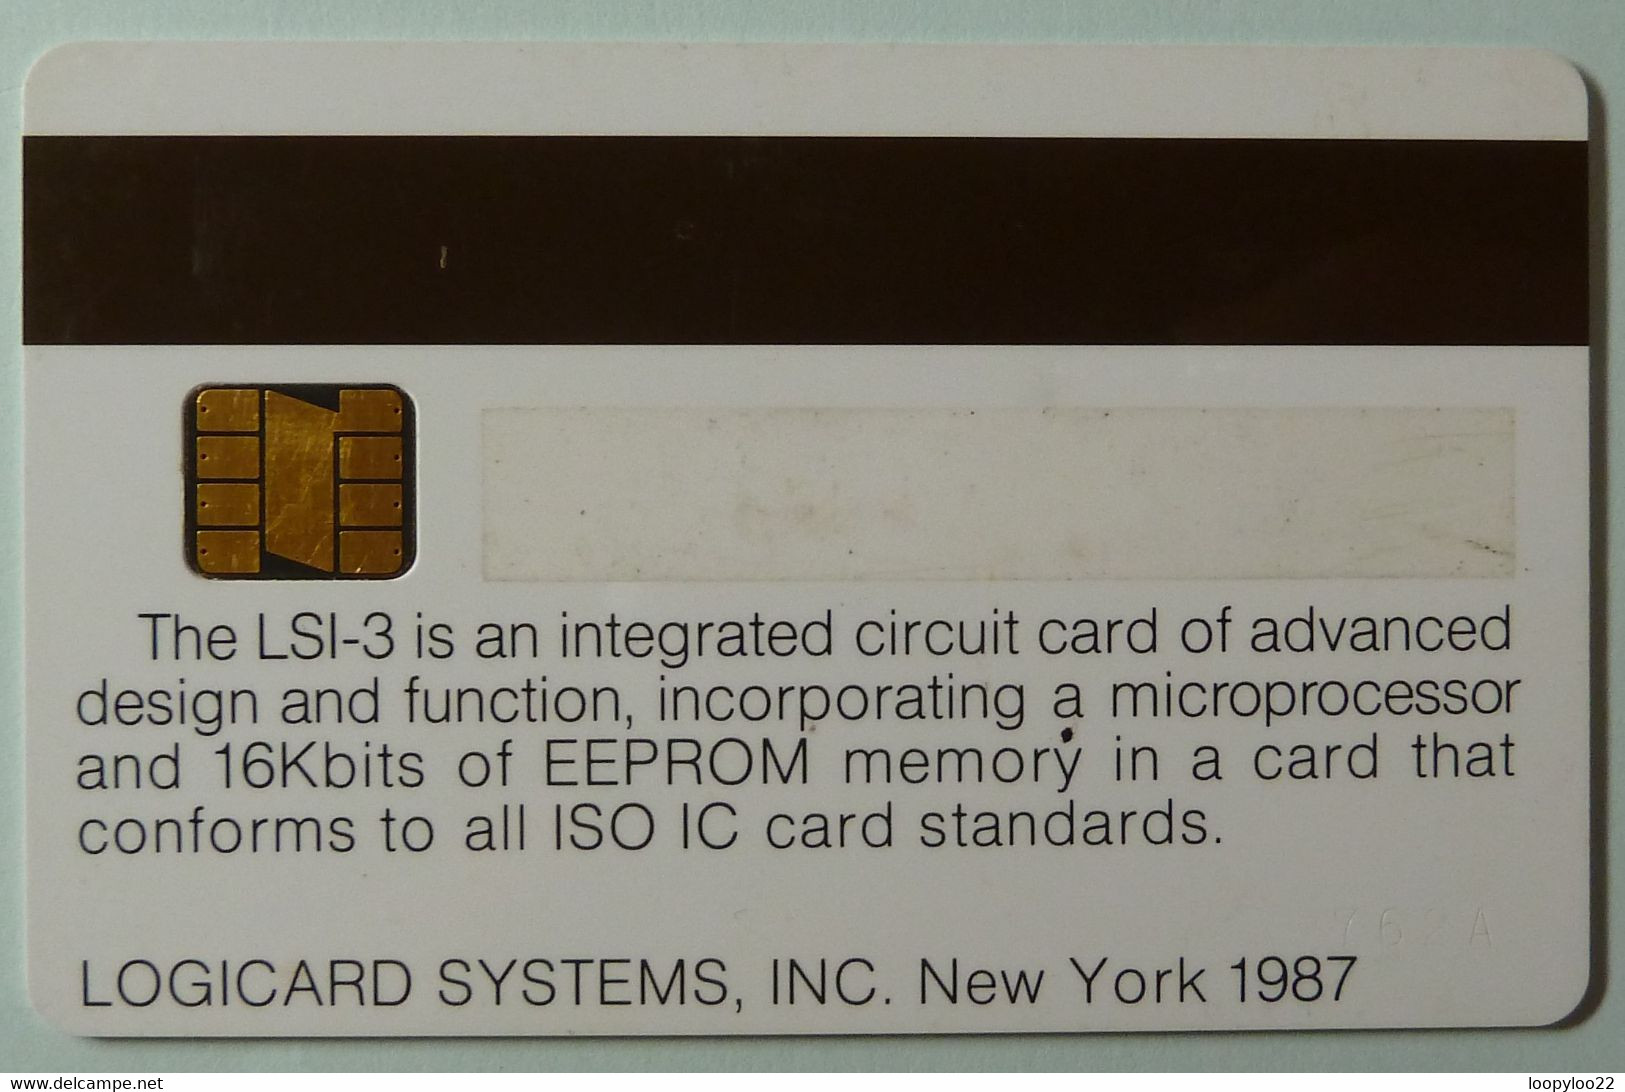 USA - Early Smart Card Demo - 1987 - LSI-3 - With Chip - RRR - Cartes à Puce